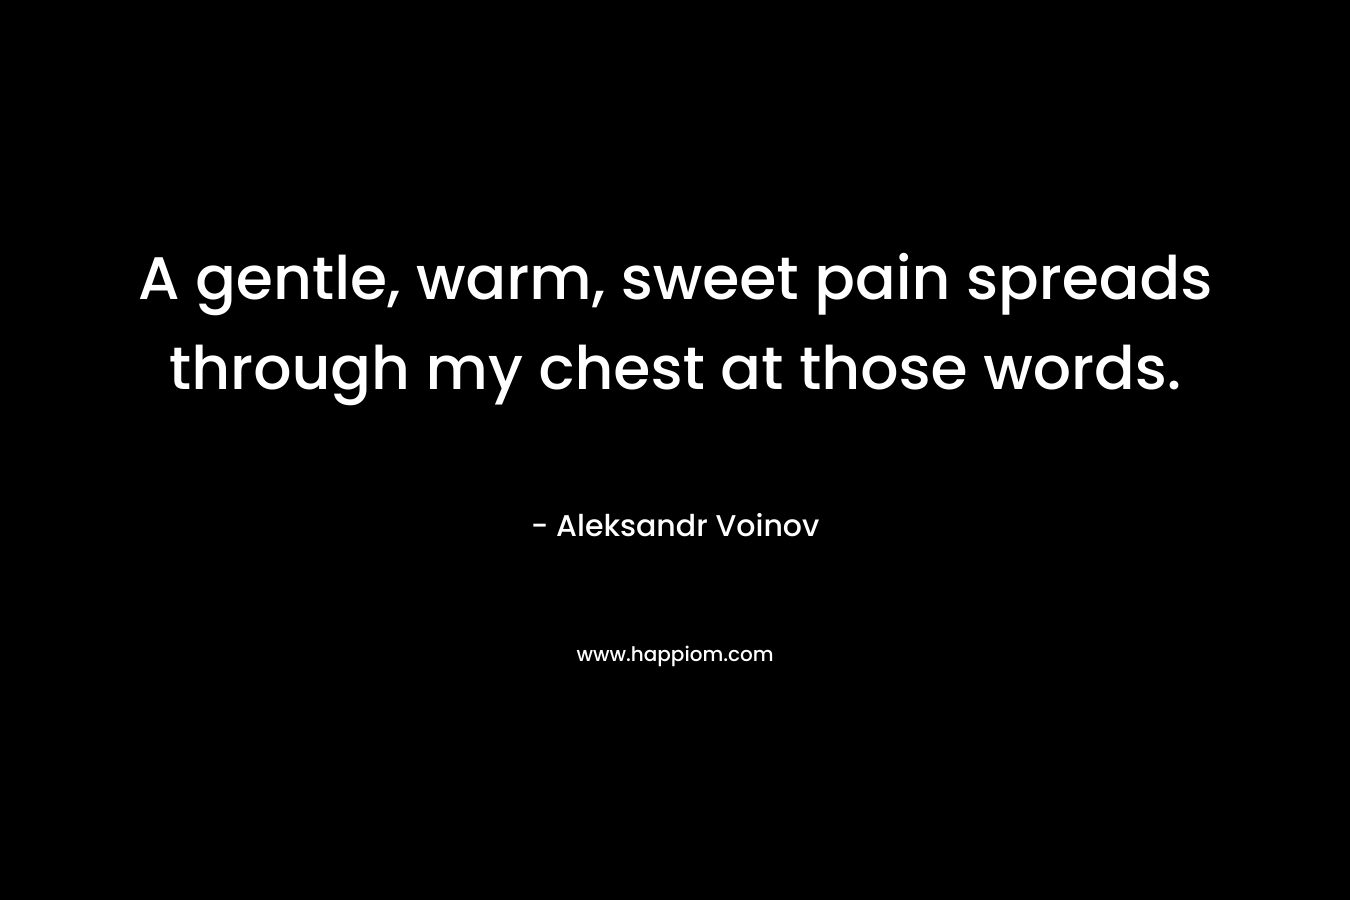 A gentle, warm, sweet pain spreads through my chest at those words.